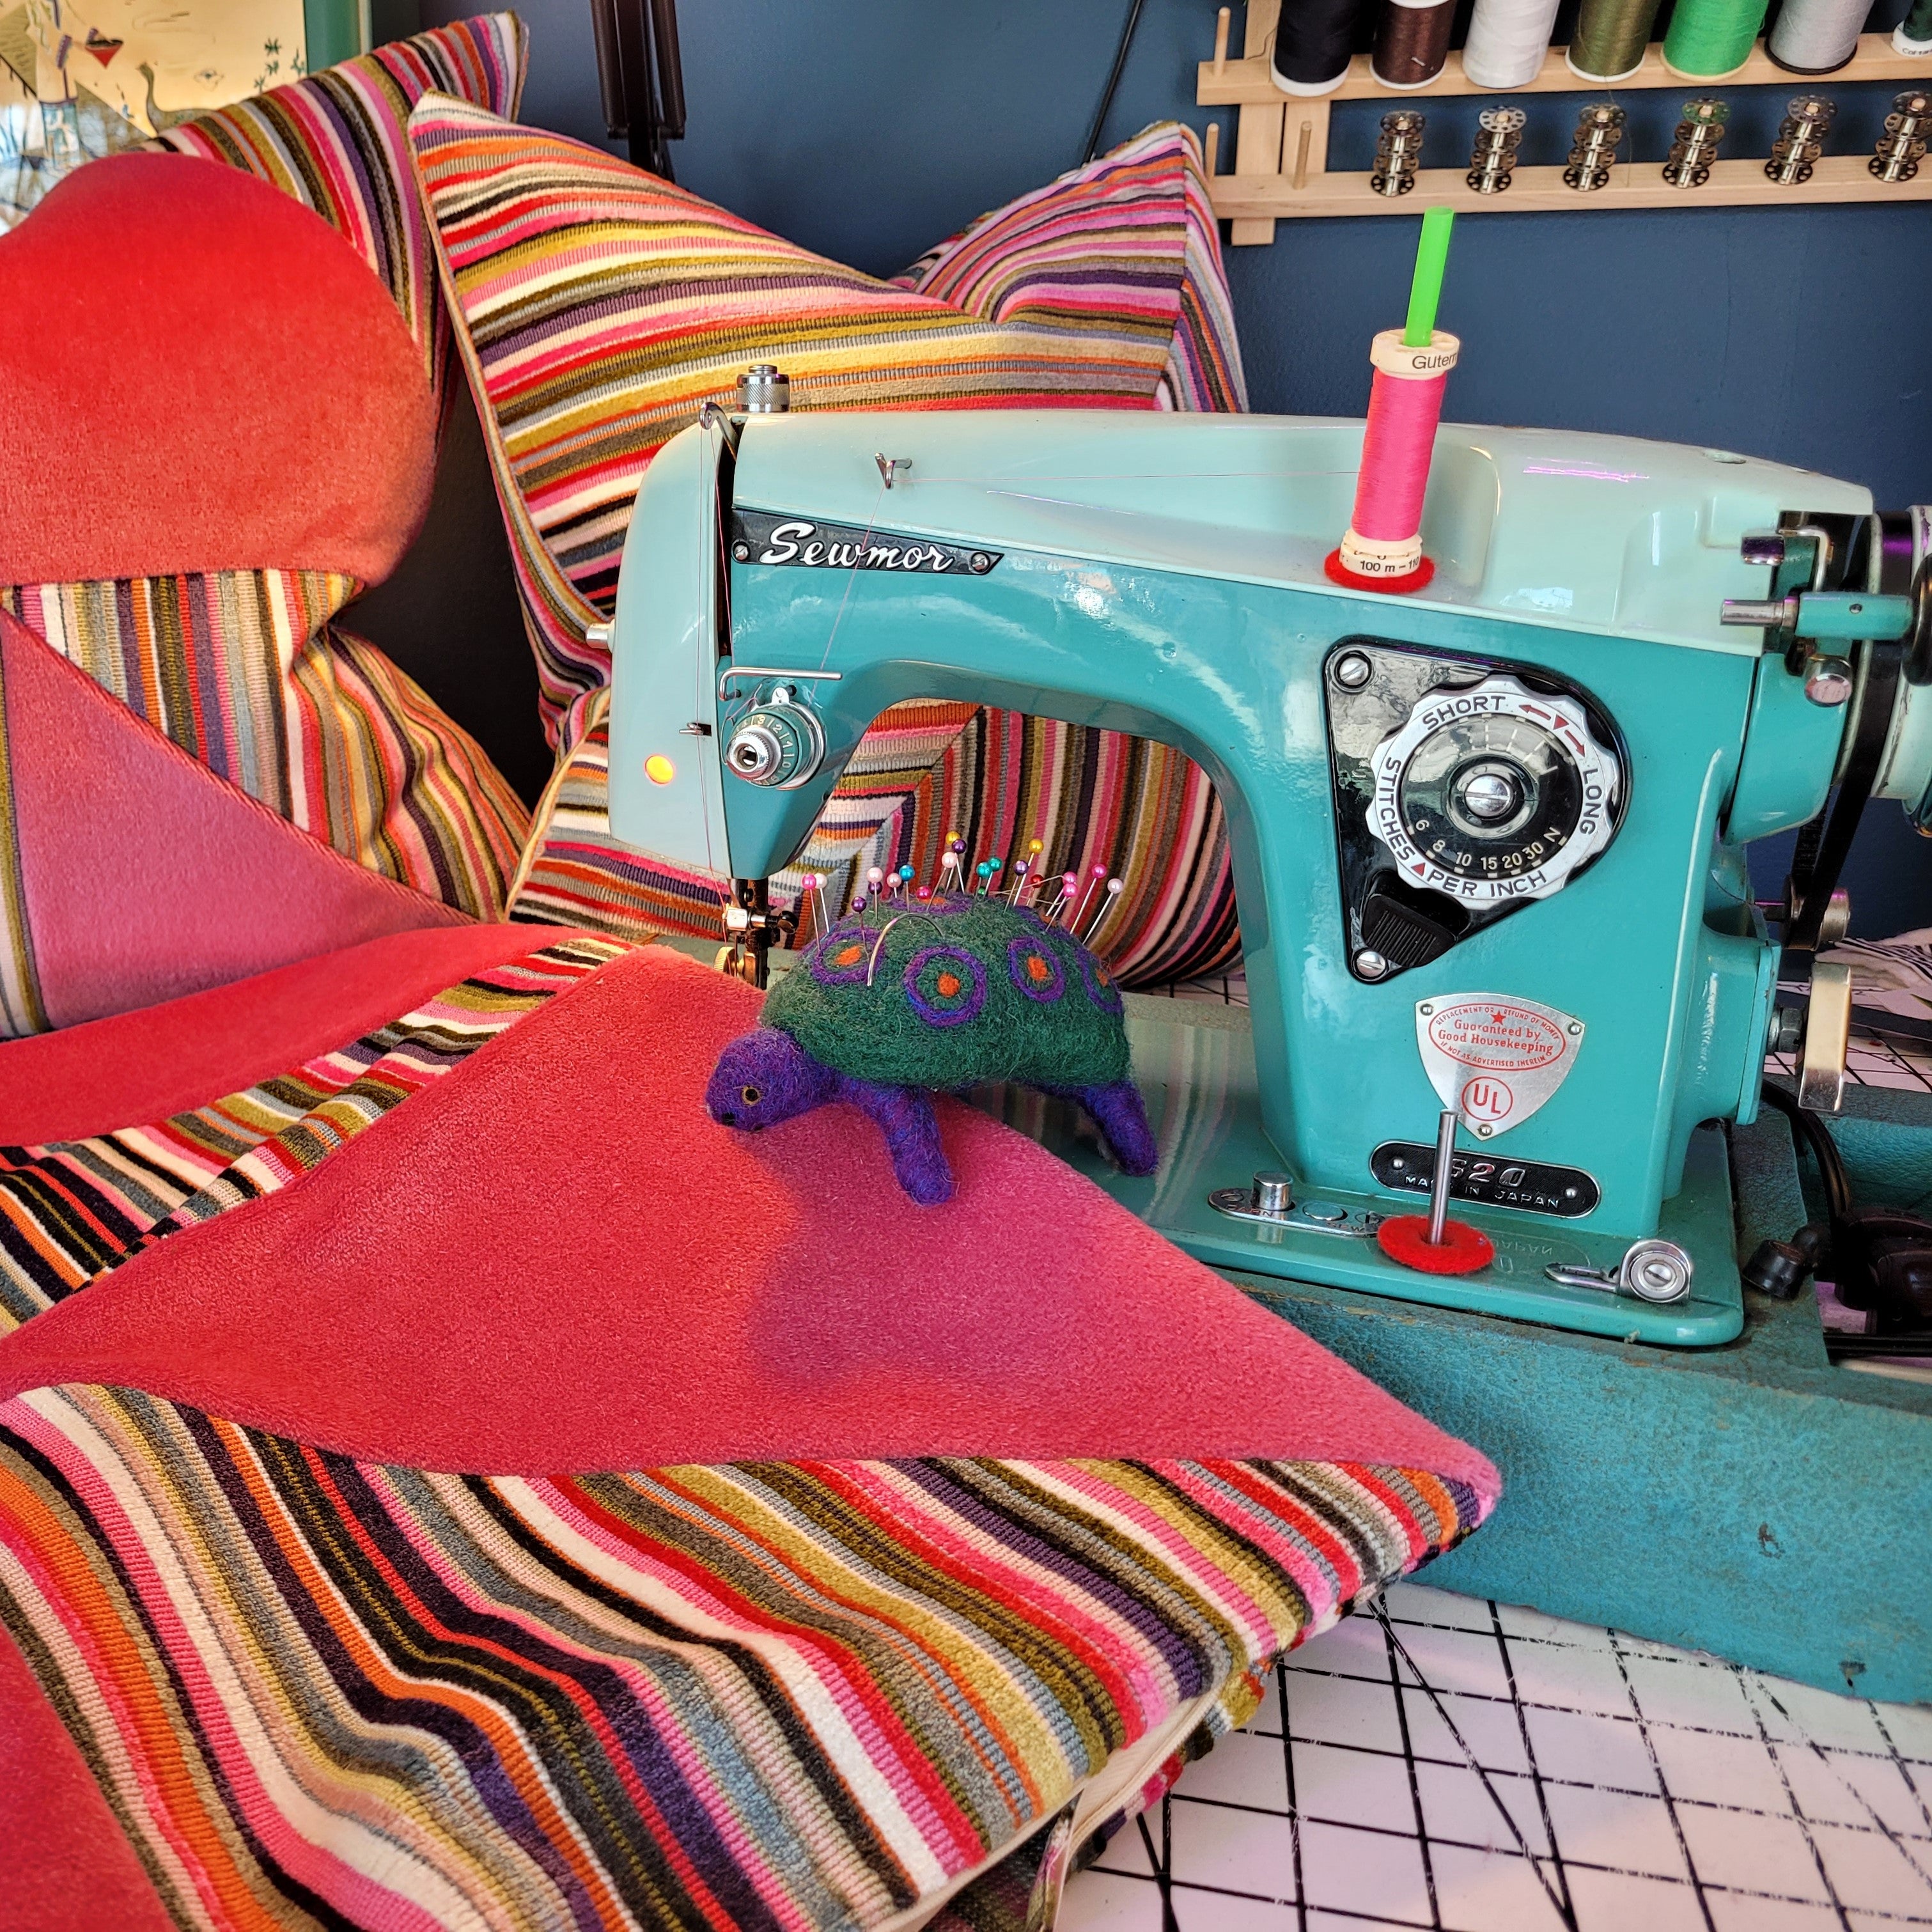 Custom designed pillows by Houston and Scott handmade on vintage sewing machines